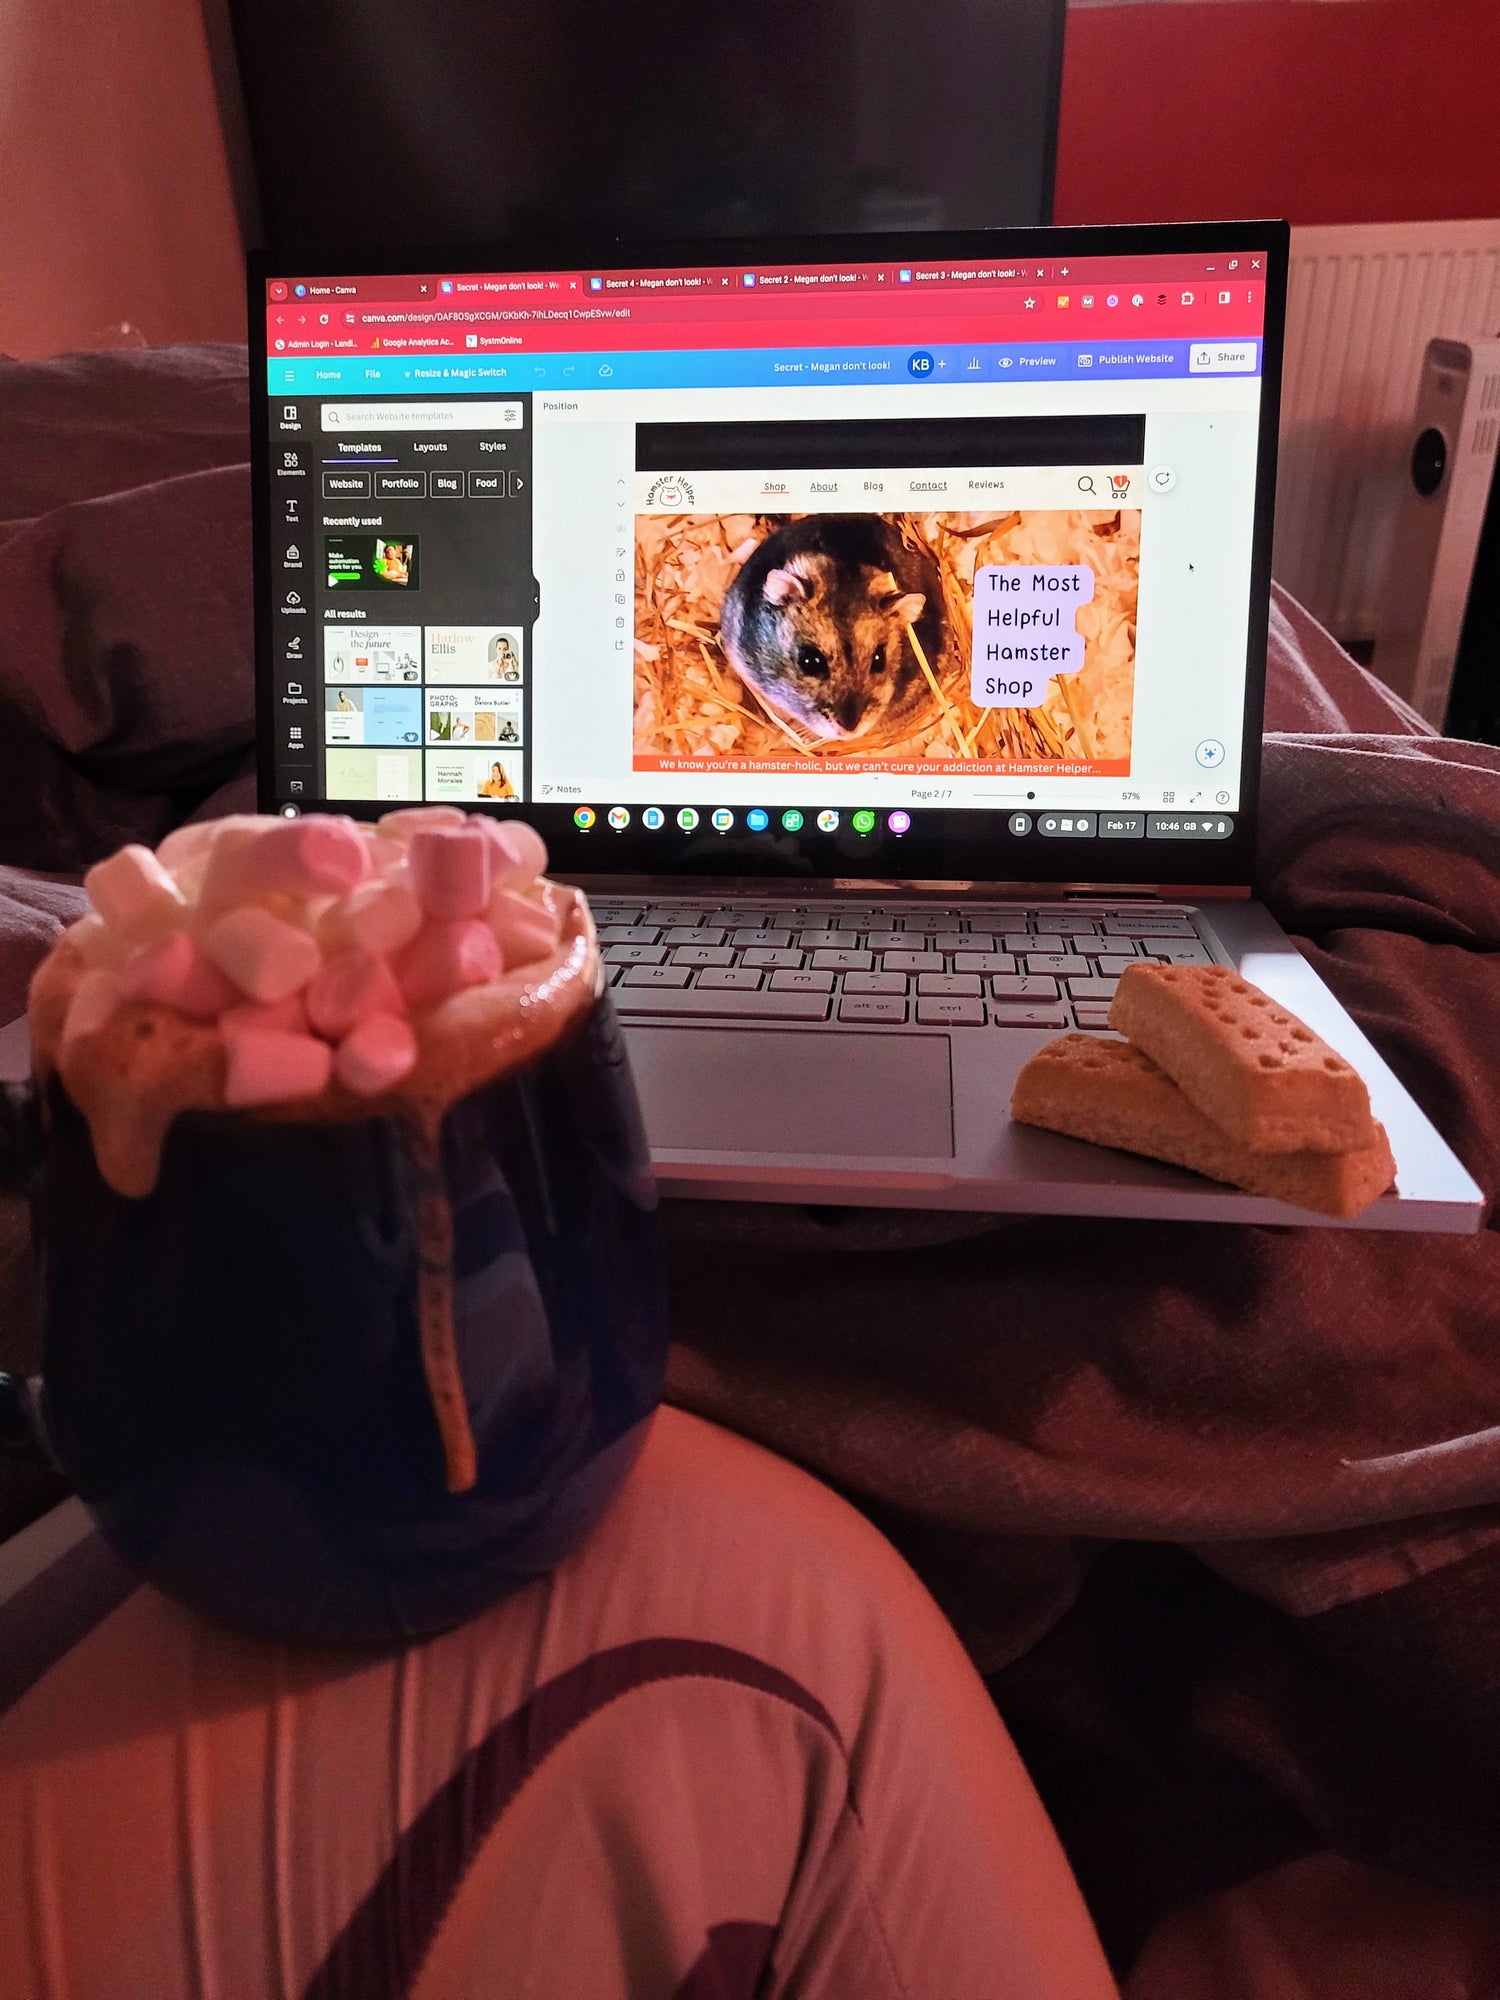 A laptop showing the Hamster Helper website being built, there are two shortbread fingers on the laptop and in the foreground there is a hot chocolate with whipped cream and marshmallows resting on a bent knee